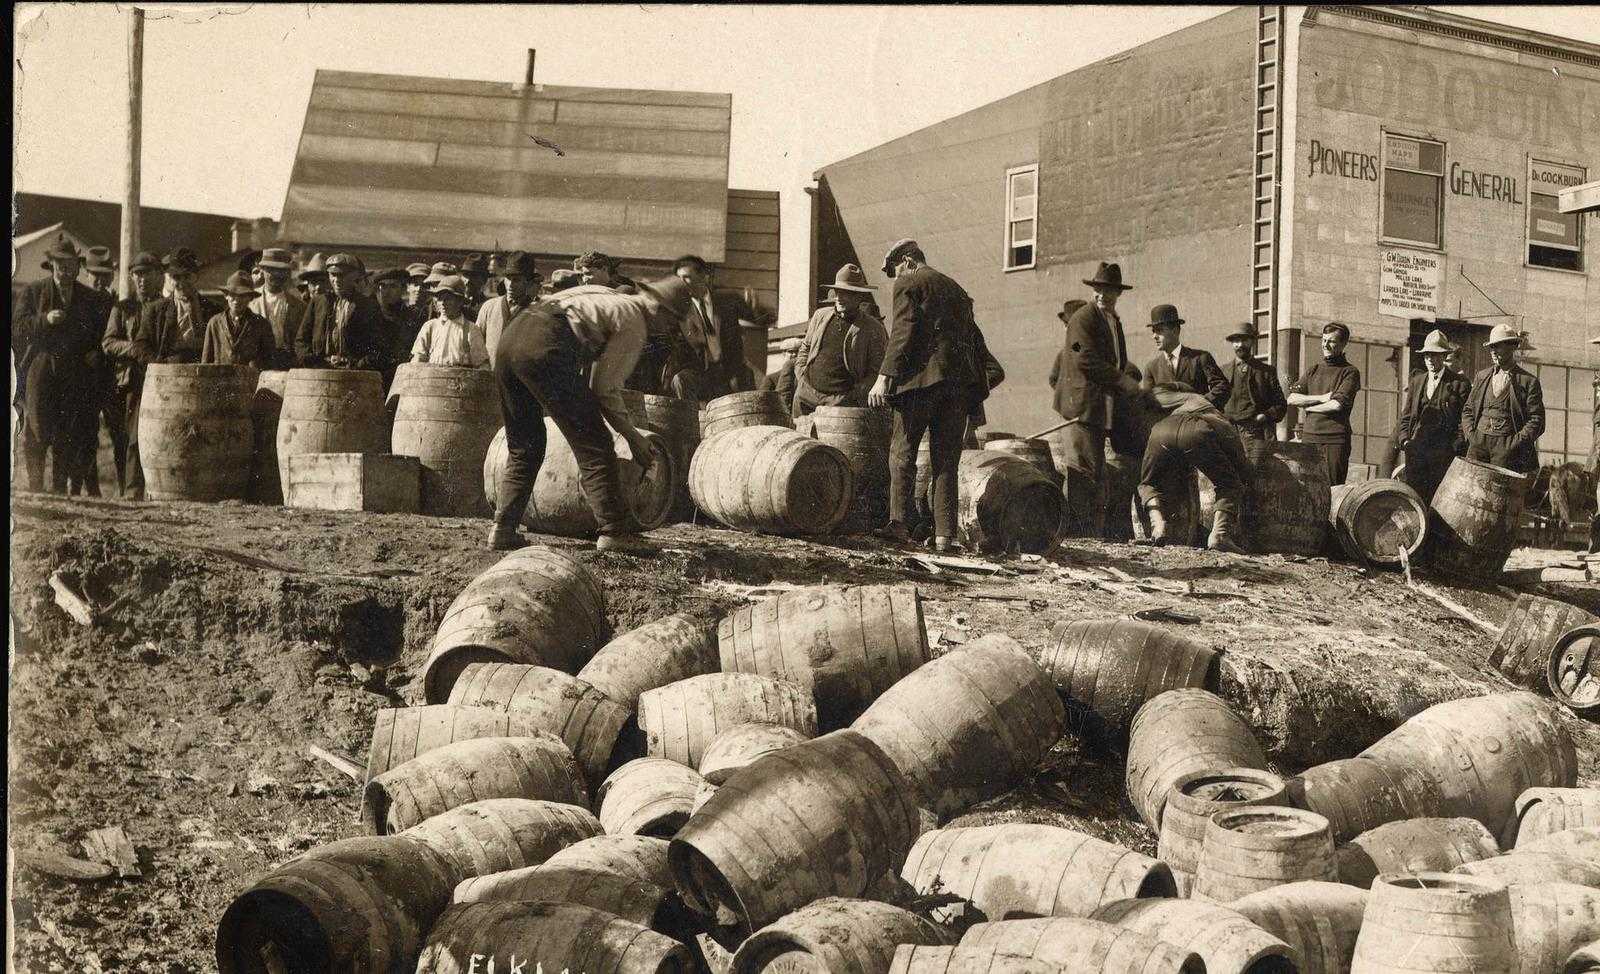 Black and white photograph. A pile of empty barrels sit at the shore of a lake. Slightly up hill, men are crowded around more barrels, moving them towards the lake for emptying.